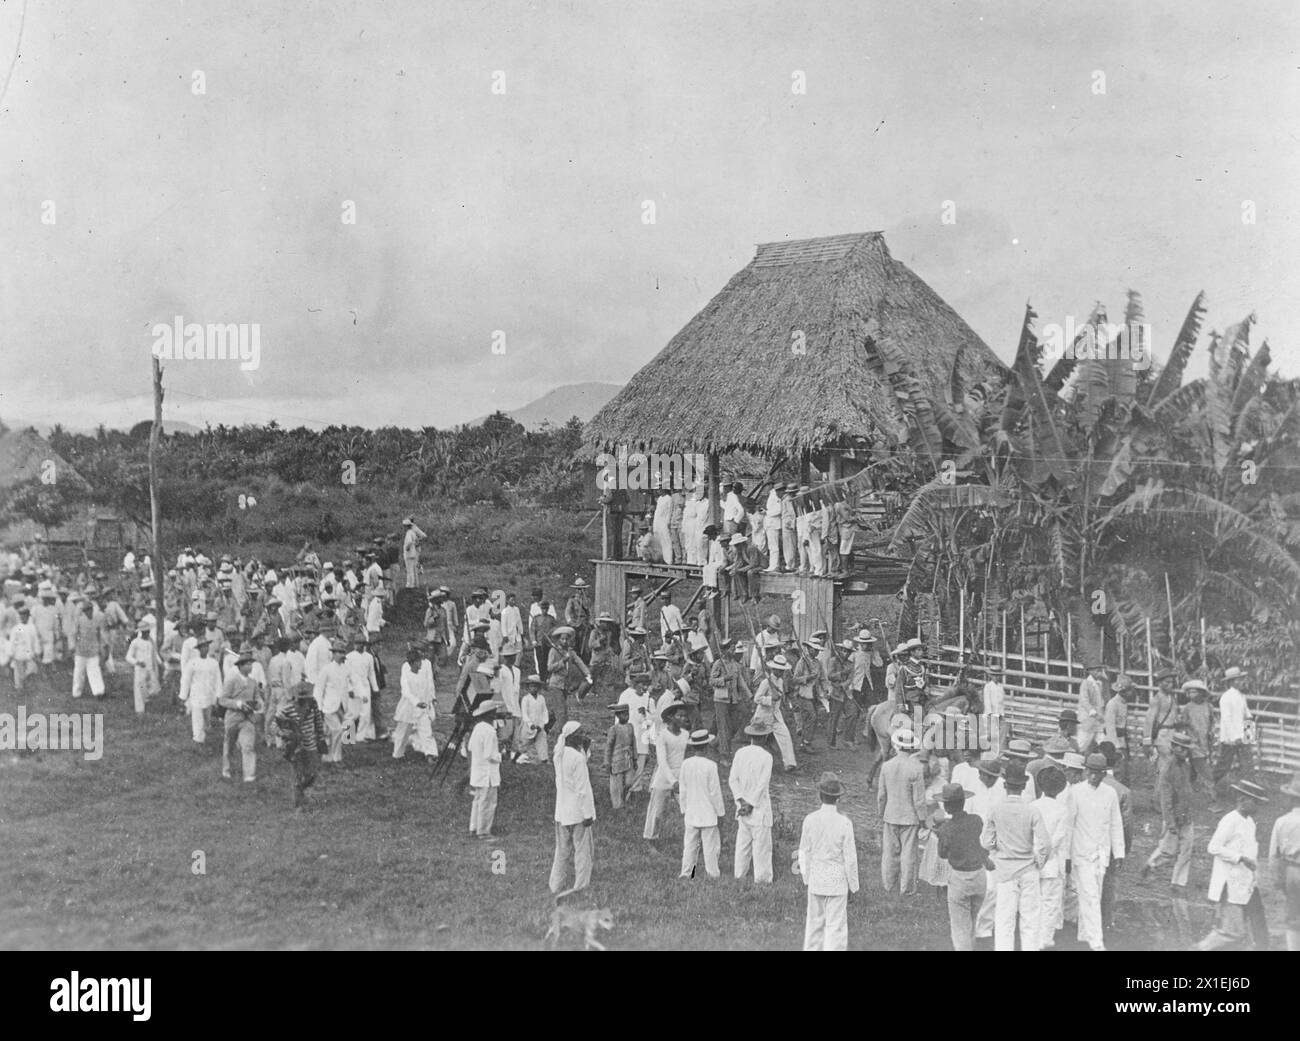 Philippines Islands Insurrection Surrender of Cailles, Santa Cruz, Laguna Province, June 24, 1901, showing insurgents marching in between line of natives. Stock Photo